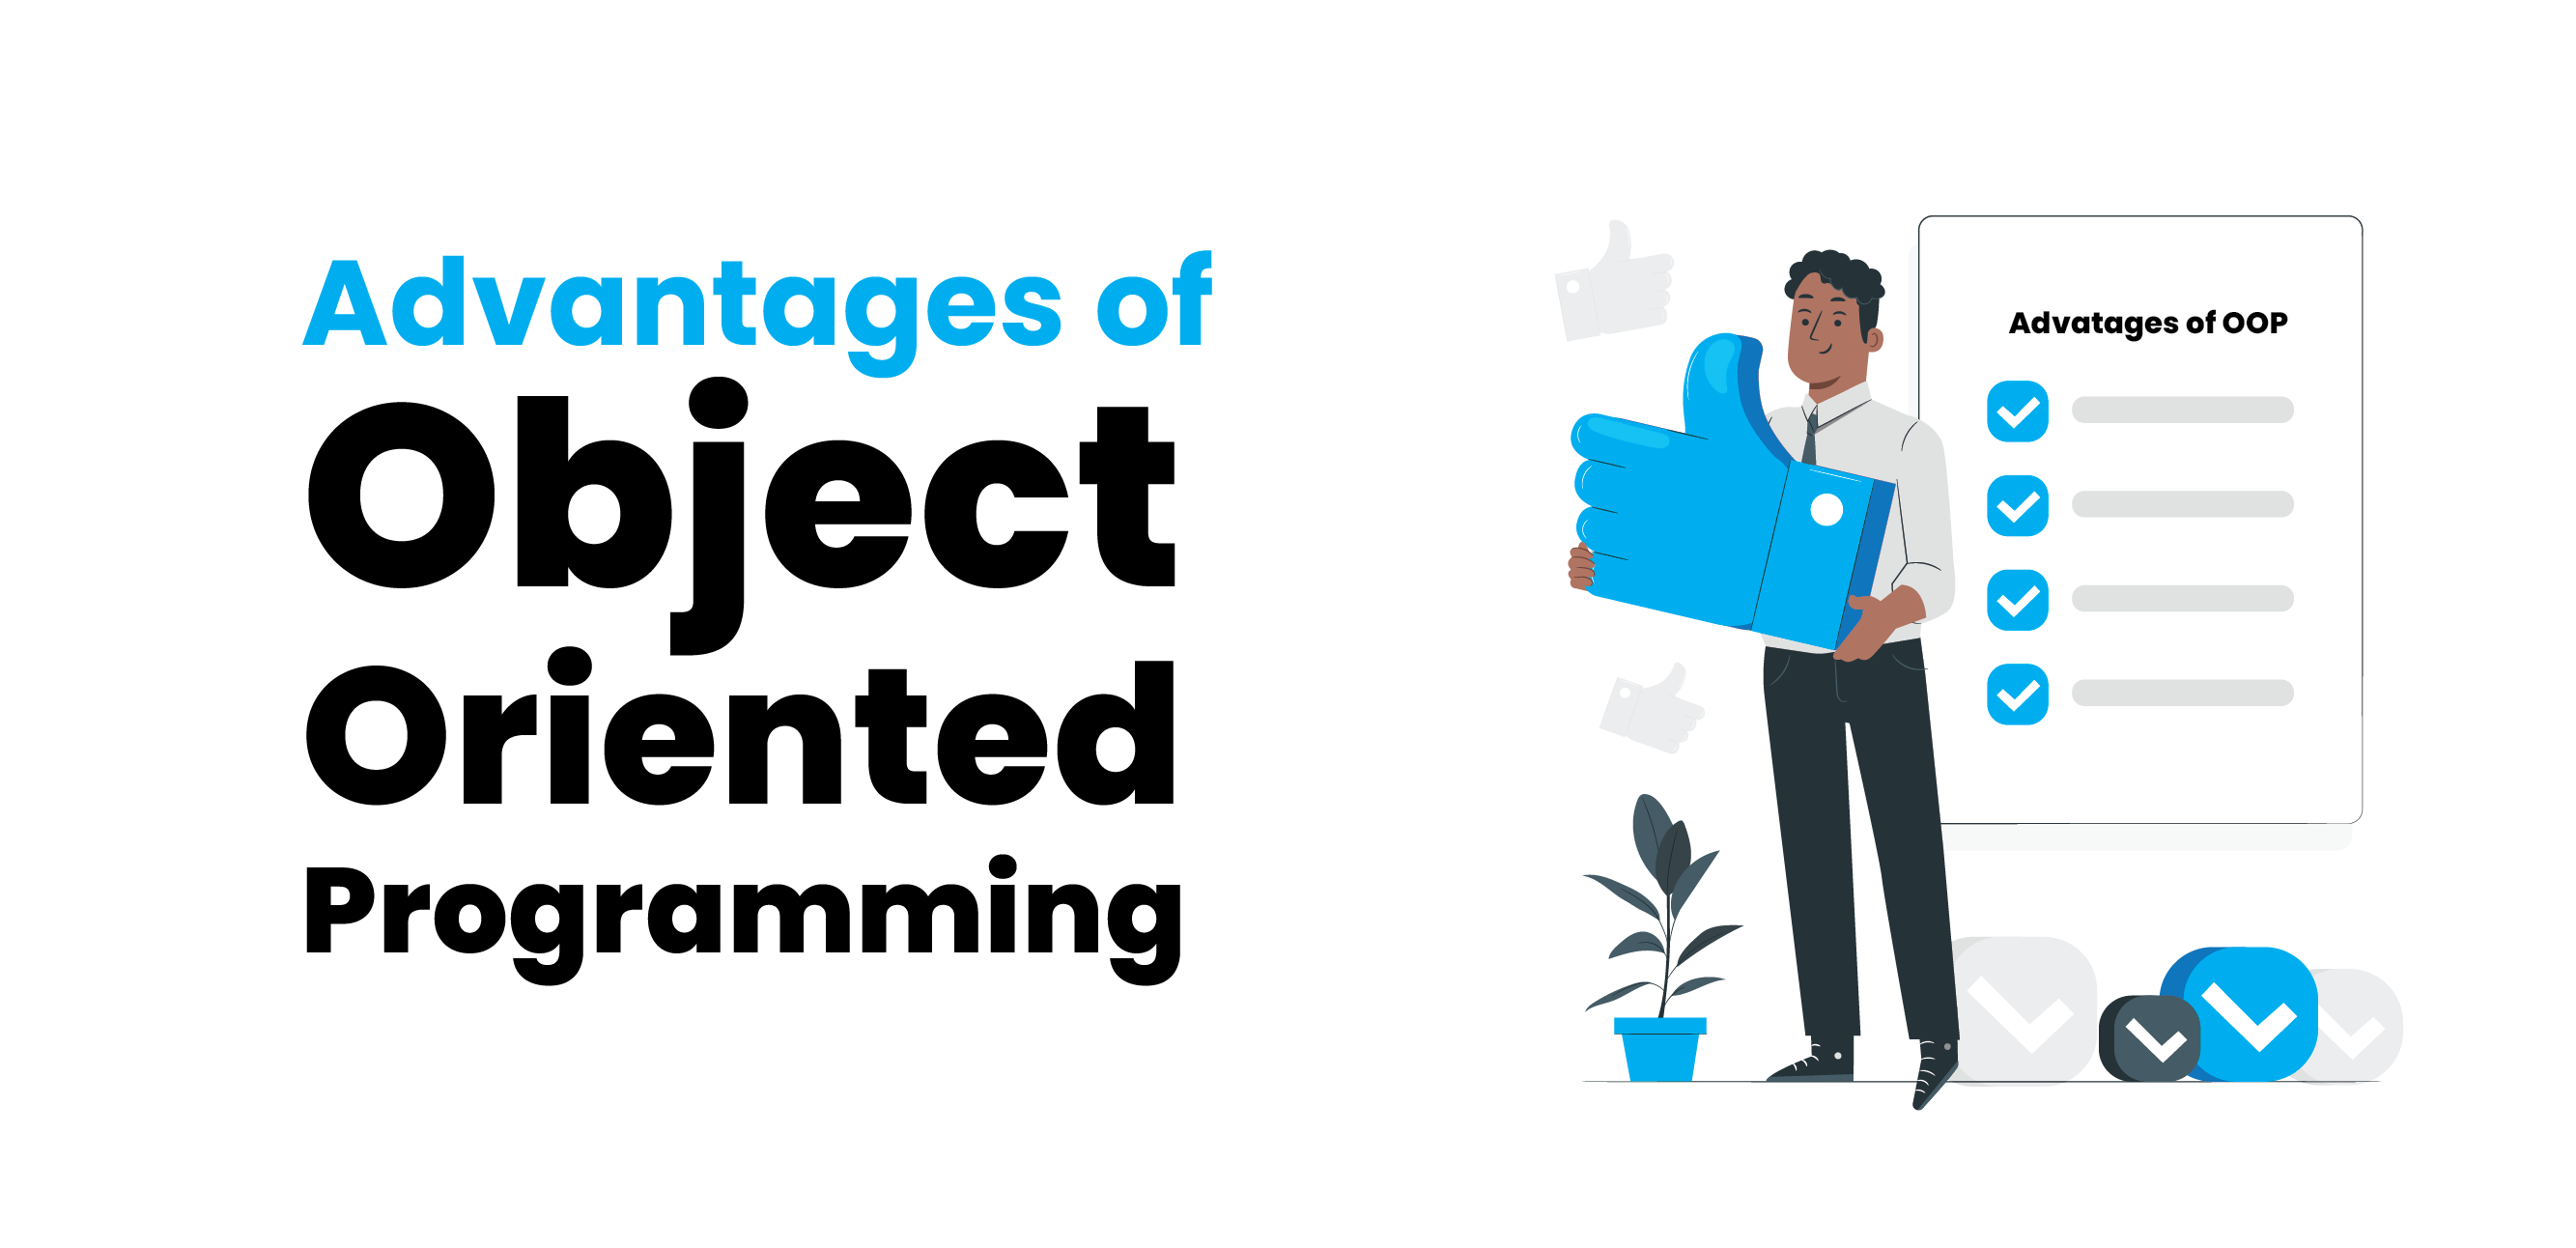 Advantages of Object Oriented Programming